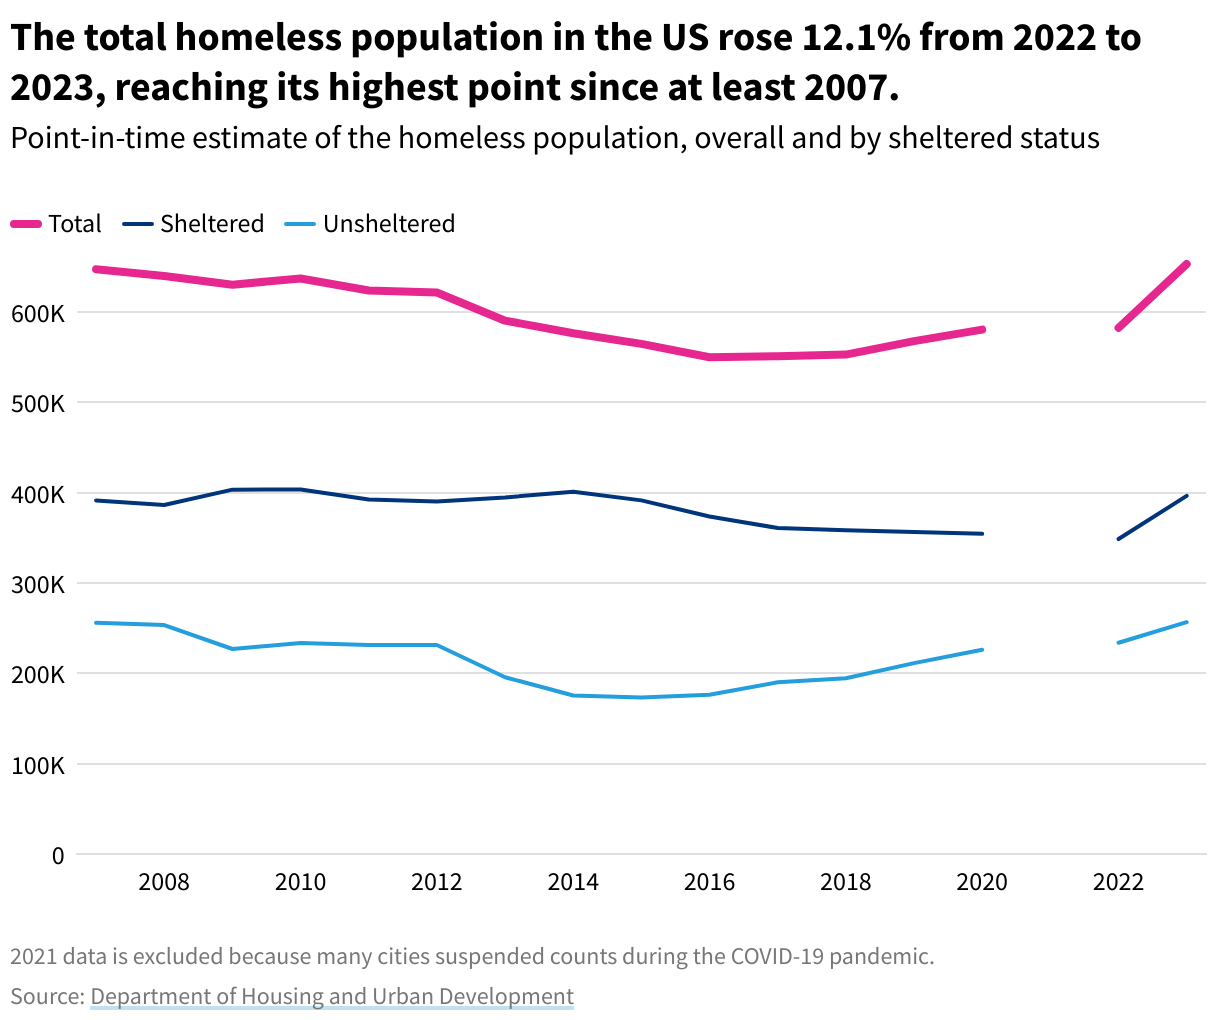 A line chart showing the homeless population from 2007 to 2023, overall and by sheltered status. 